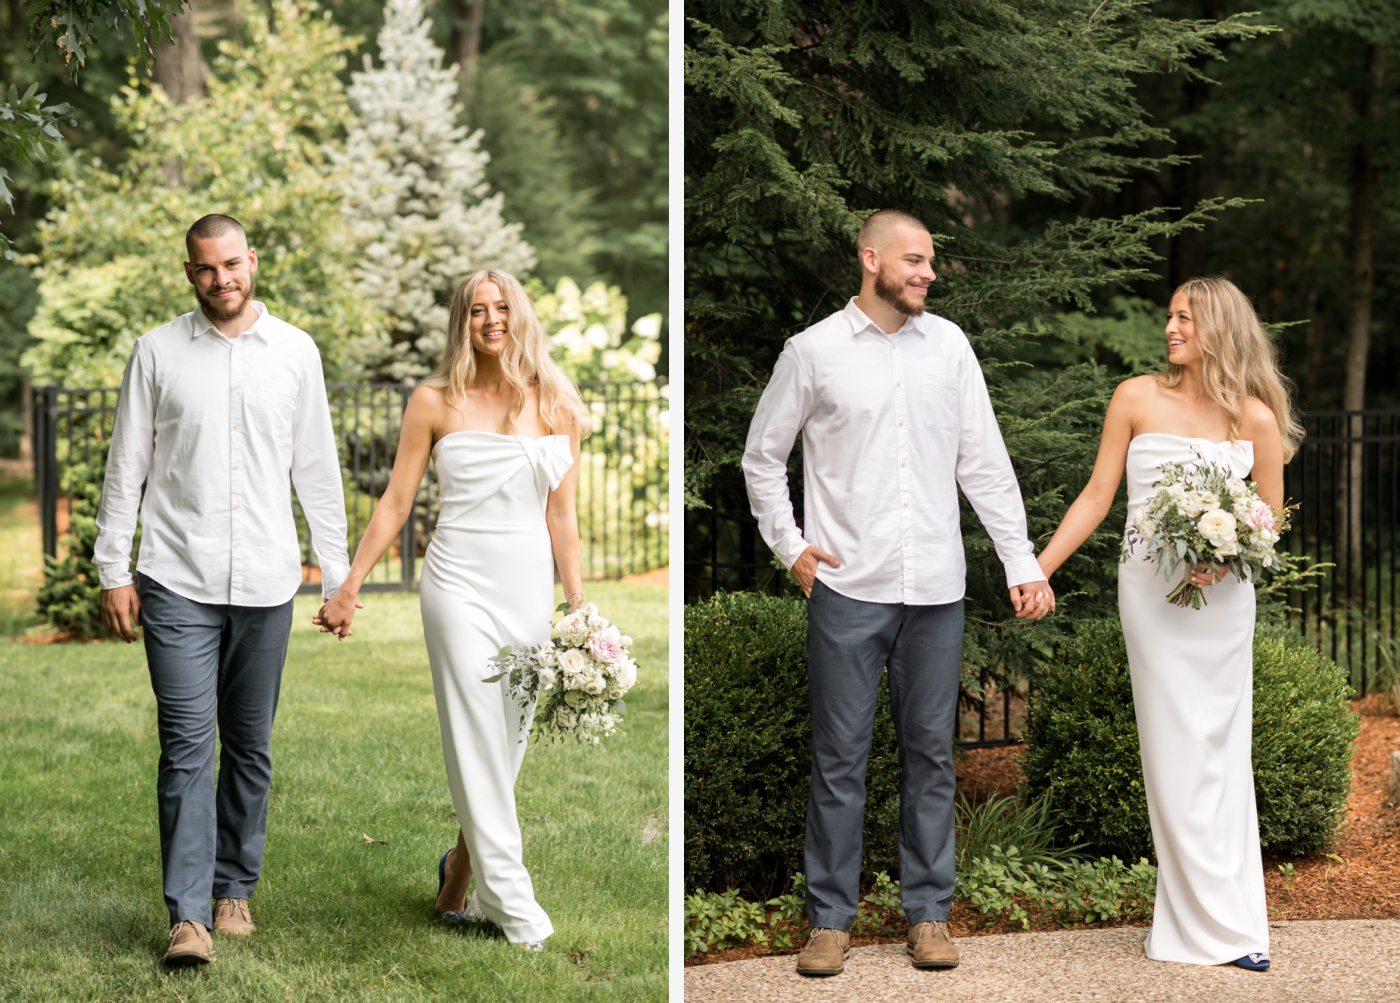 Bride and groom portraits in a private backyard in New England